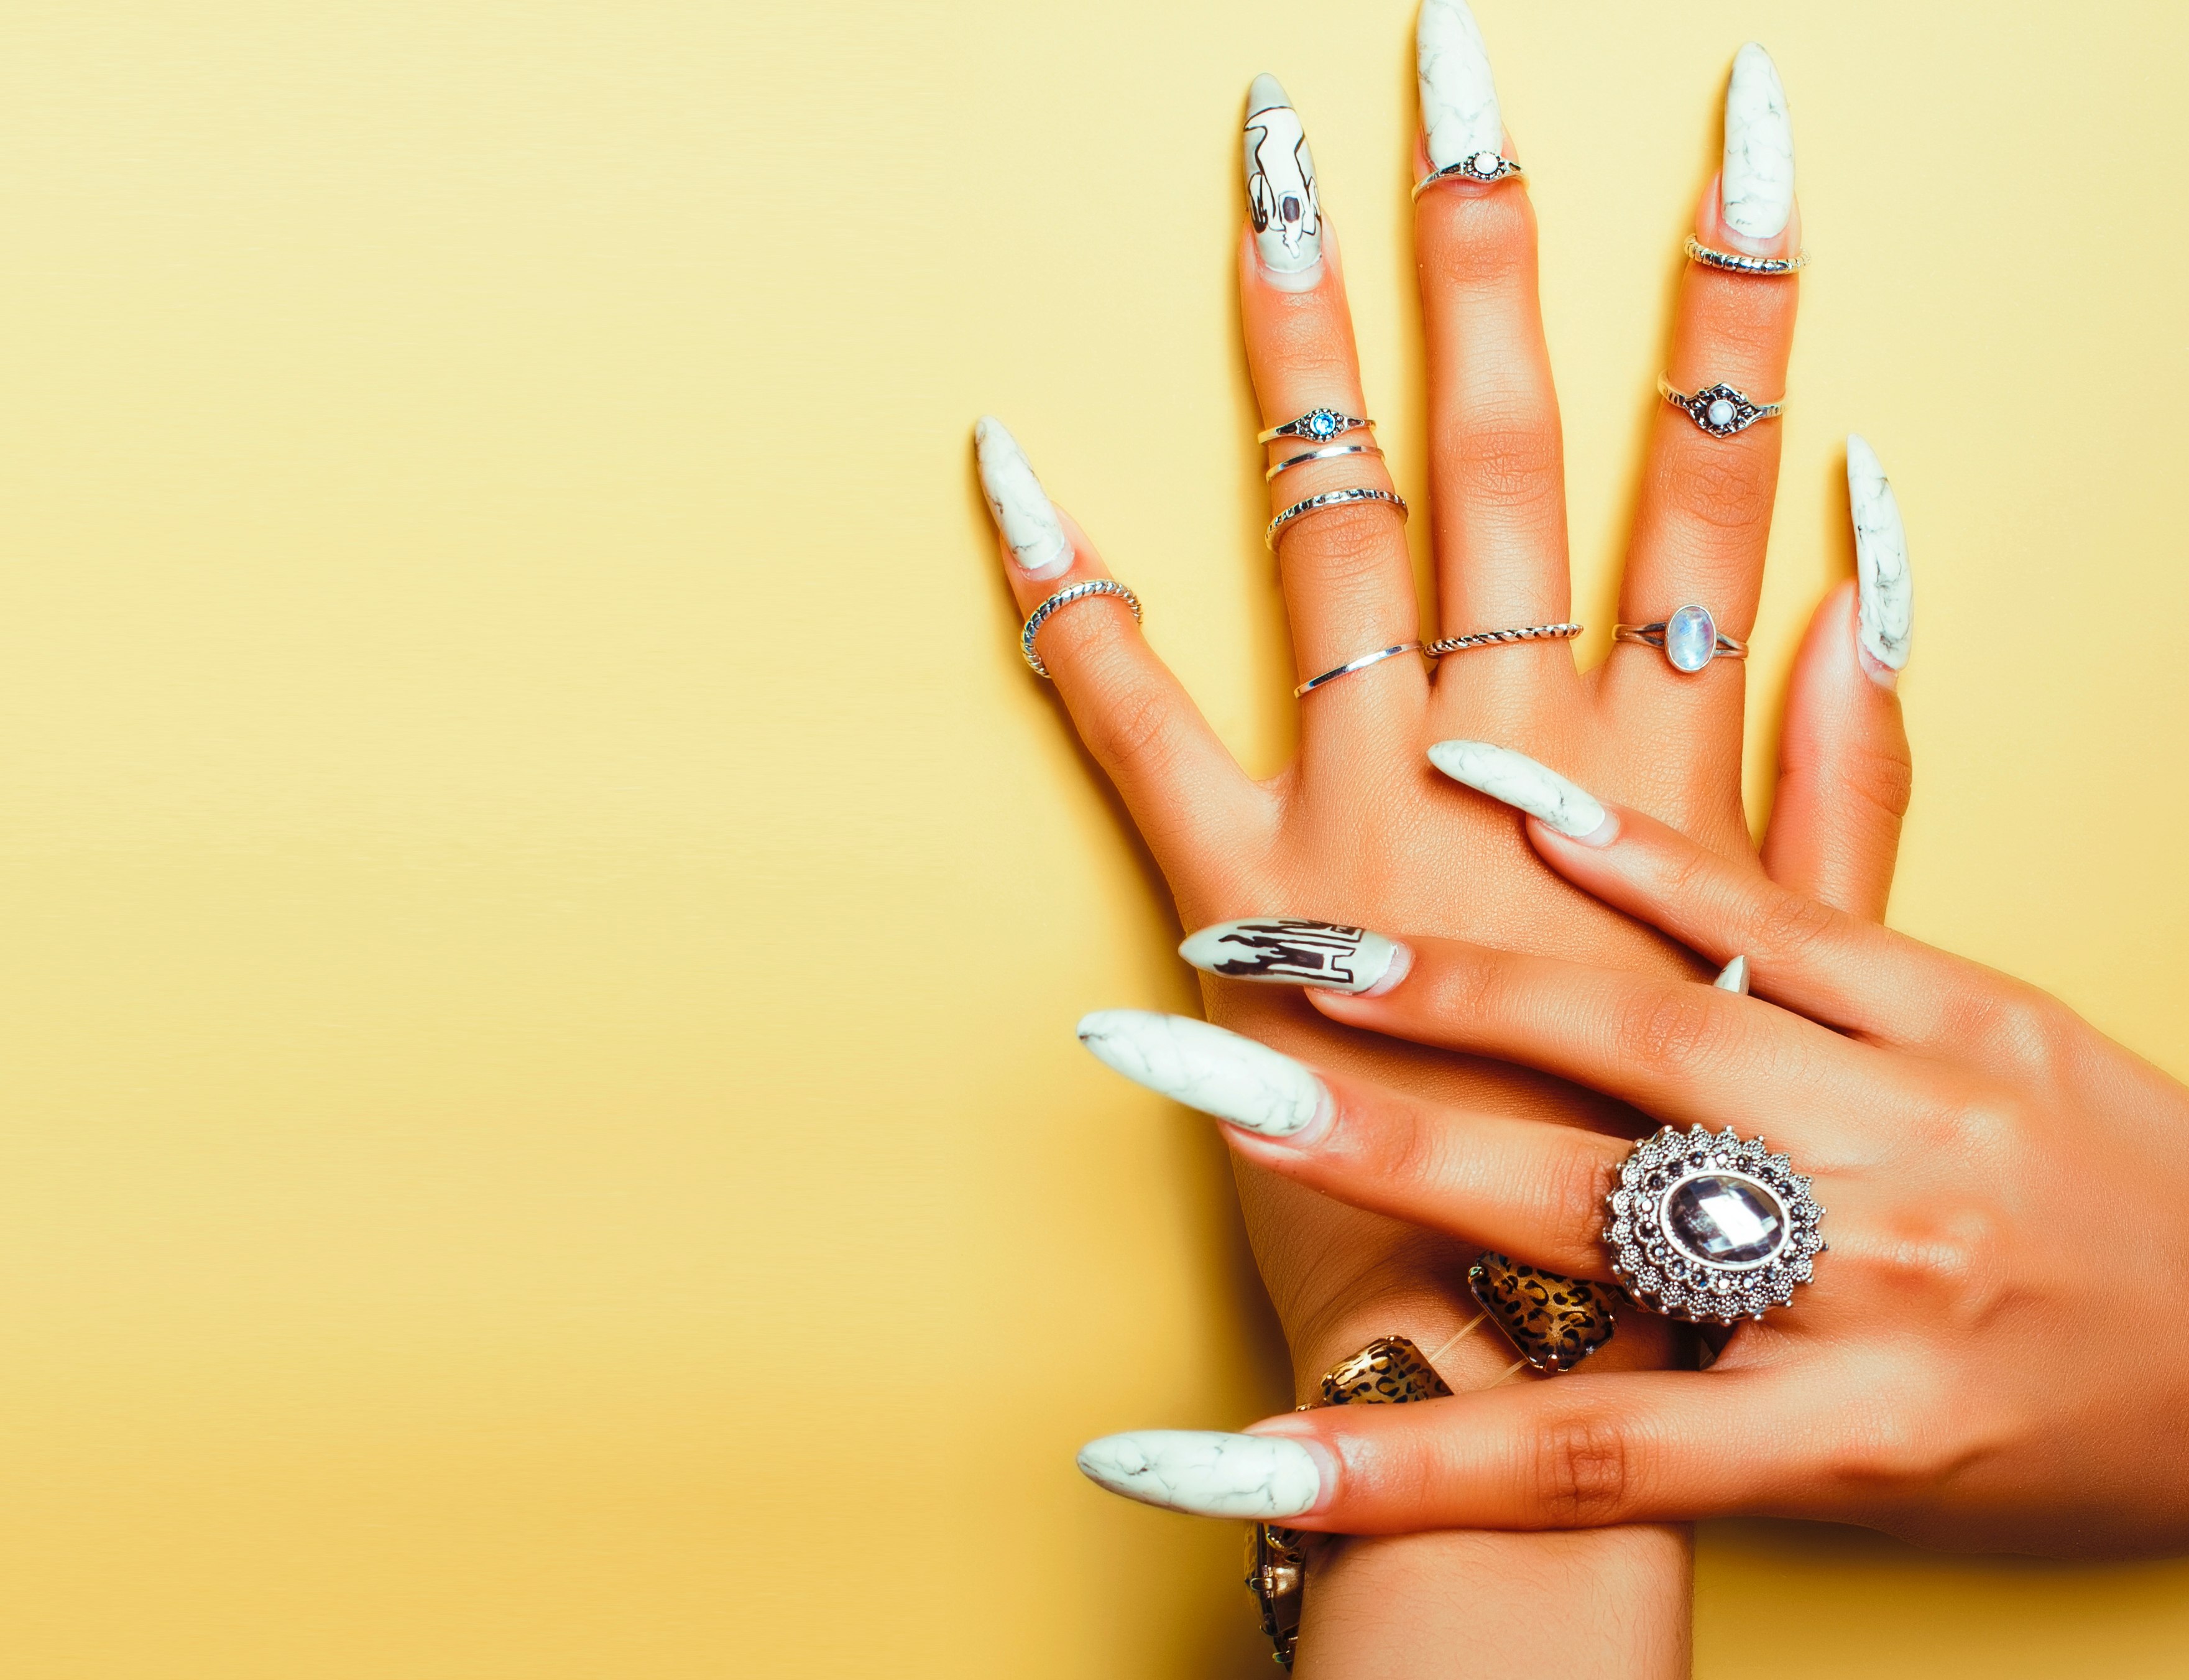 An alternative woman wears a variety of unique rings on her fingers.